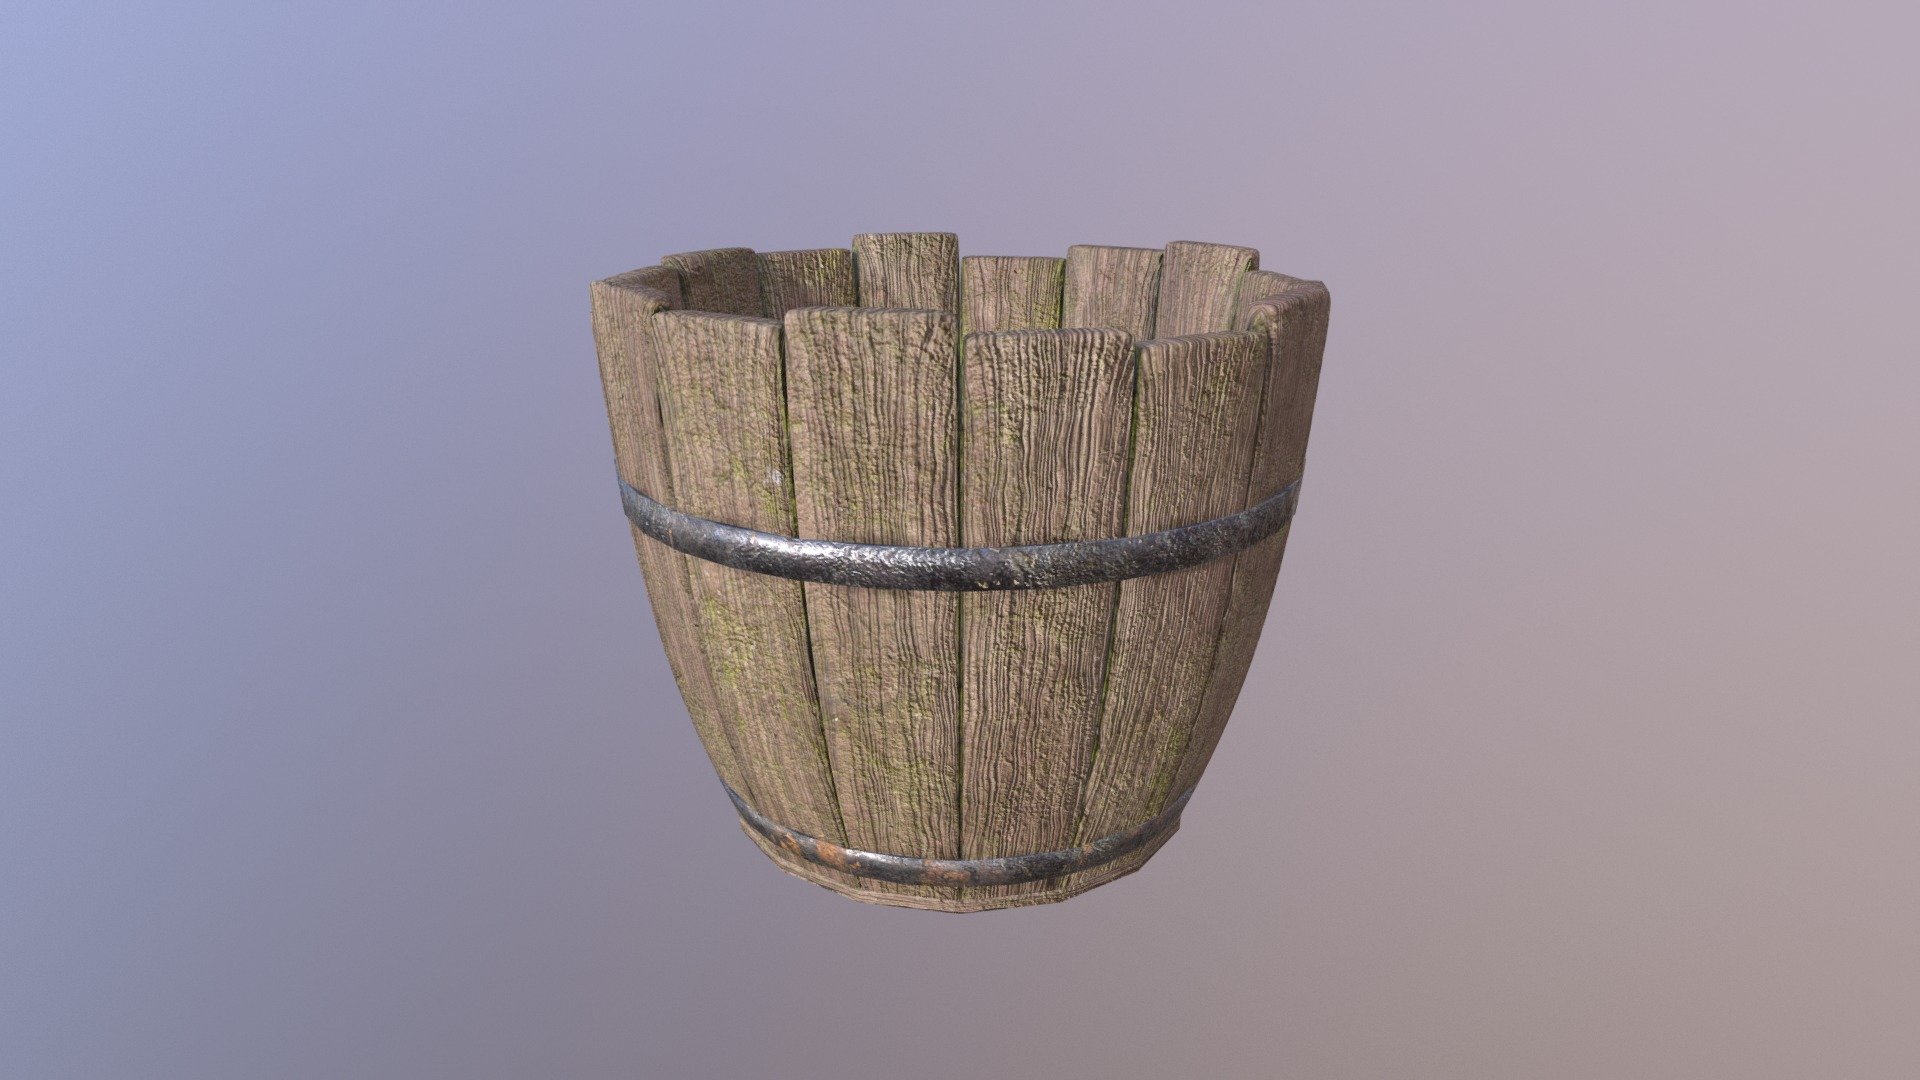 Note: All 6 different texture variants are included in this purchase.

This is a mossy old and worn wooden bucket that was 3D modeled in 3ds max and textured in Substance Painter. These were originally created over 6 months ago. But I decided to update their wear &amp; tear and make another set of texture variants for the store.

[Model Statistics]

Polygons: 8,224

Triangles: 16,000

Verts: 8,214

Static Models: Yes, Low/Med-Poly

Formats: .FBX (Low/Med-Poly), .spp (Substance Painter), .Max (3ds Max Files)

Materials: Yes | PBR Metal/Rough Workflow

Textures: Yes | Base Color, Height, Metallic, Normals, Roughness, AO

UVW Mapping: Yes

Unwrapped UVs: No Overlapping UV Islands

Theme: Medieval, Town, Water, Container, Tool

Real-World Scale?: Yes - Wooden Bucket - Mossy (Variant 1a) - Buy Royalty Free 3D model by Omnipotent 3d model